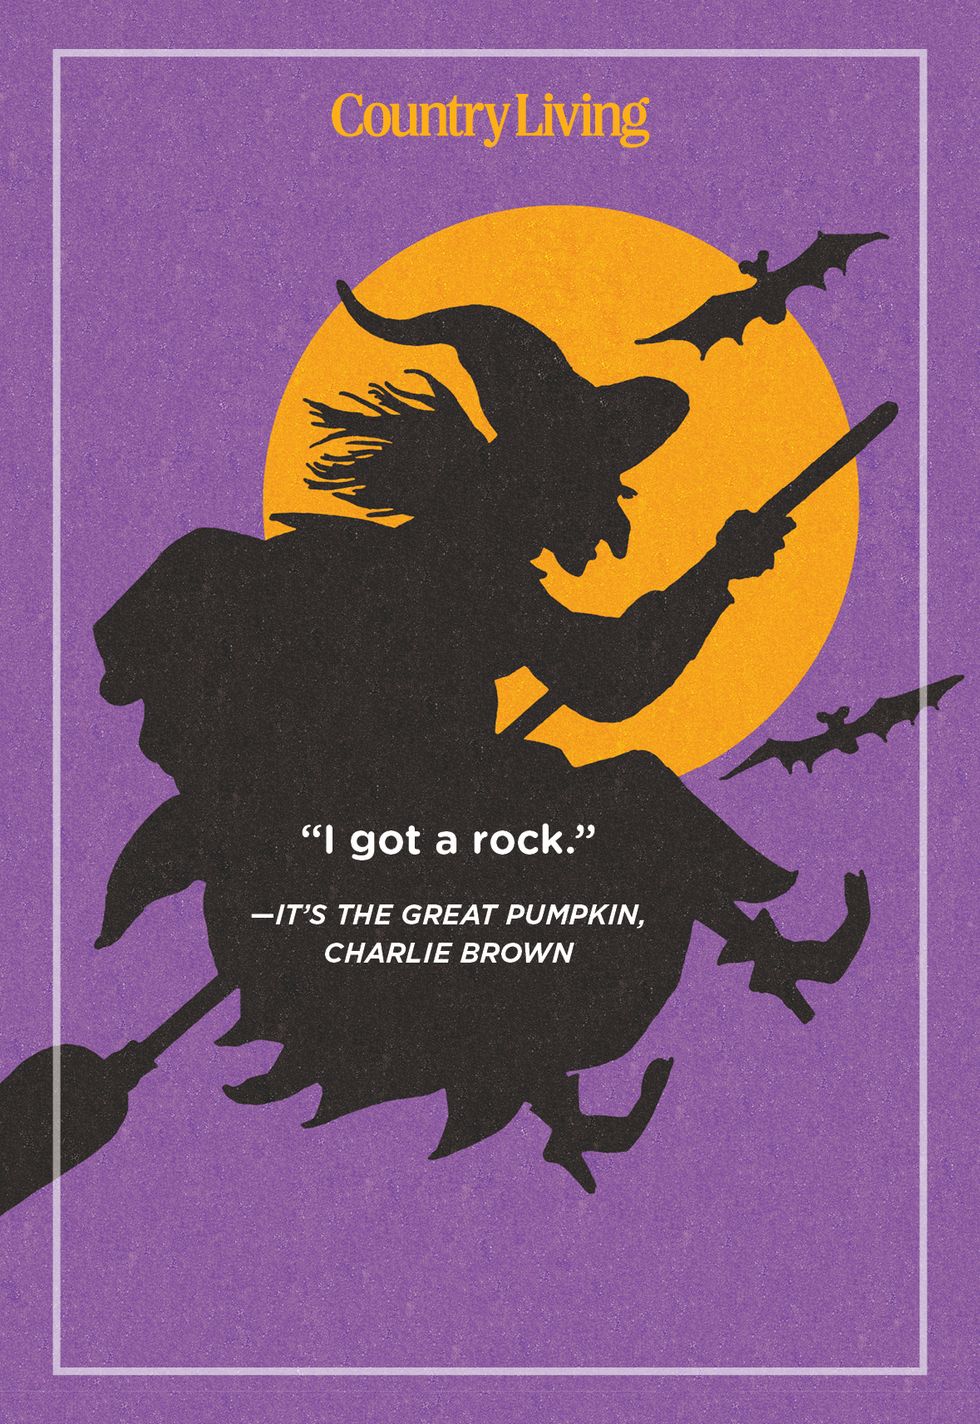 charlie brown halloween quote